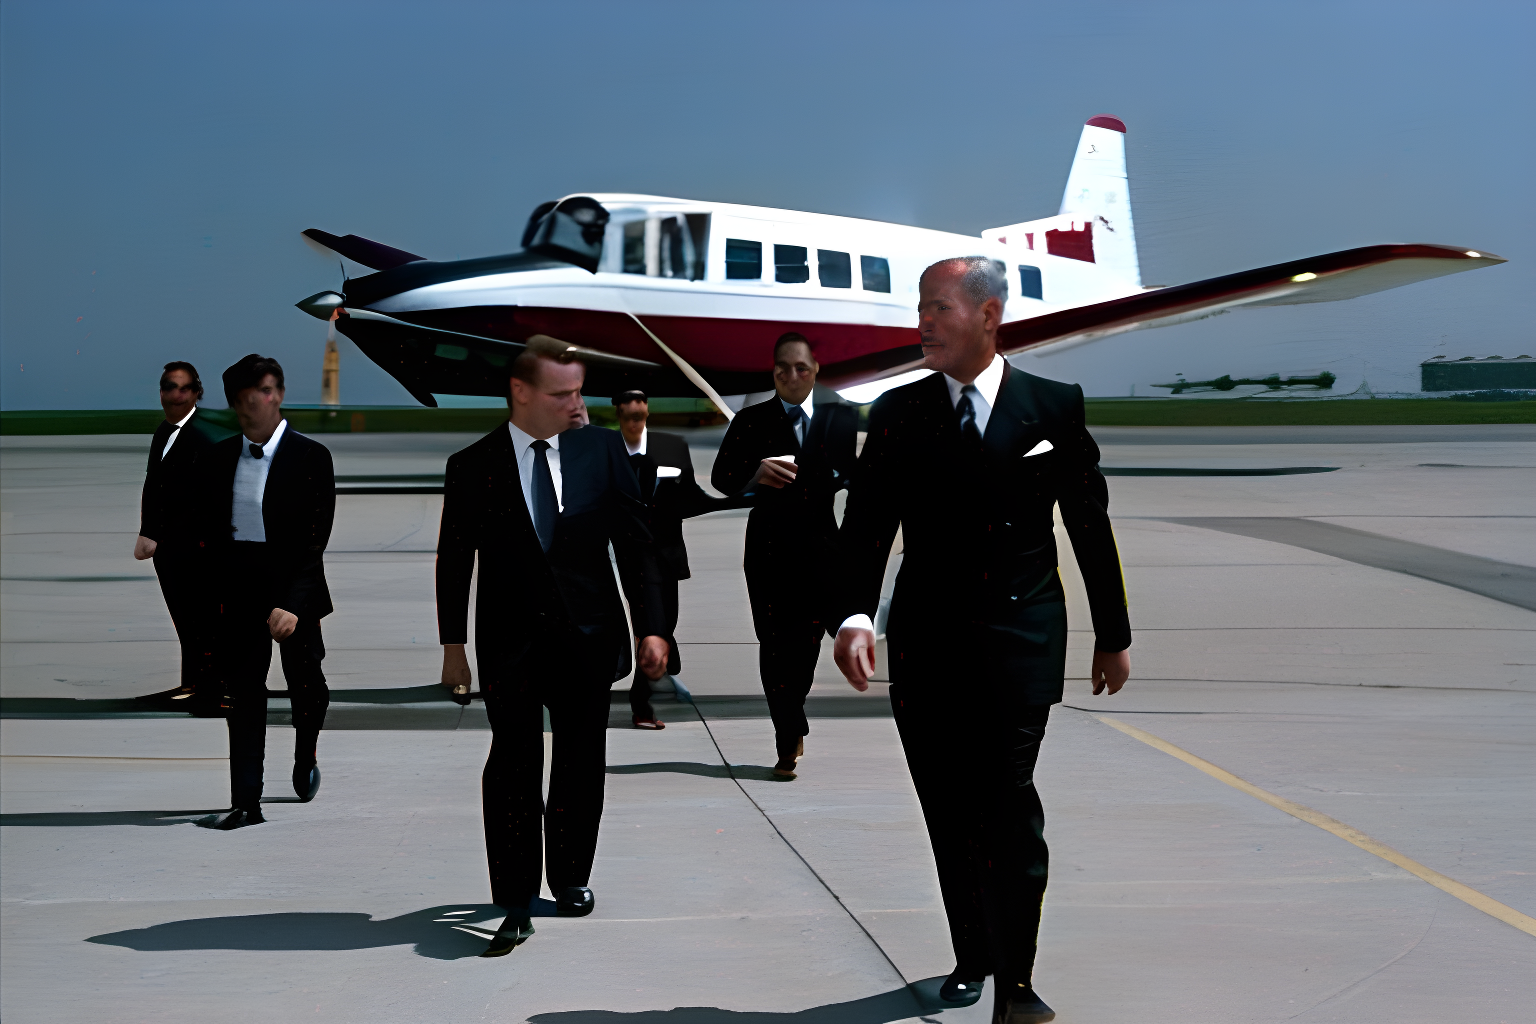 a group of men in suits around an aircraft